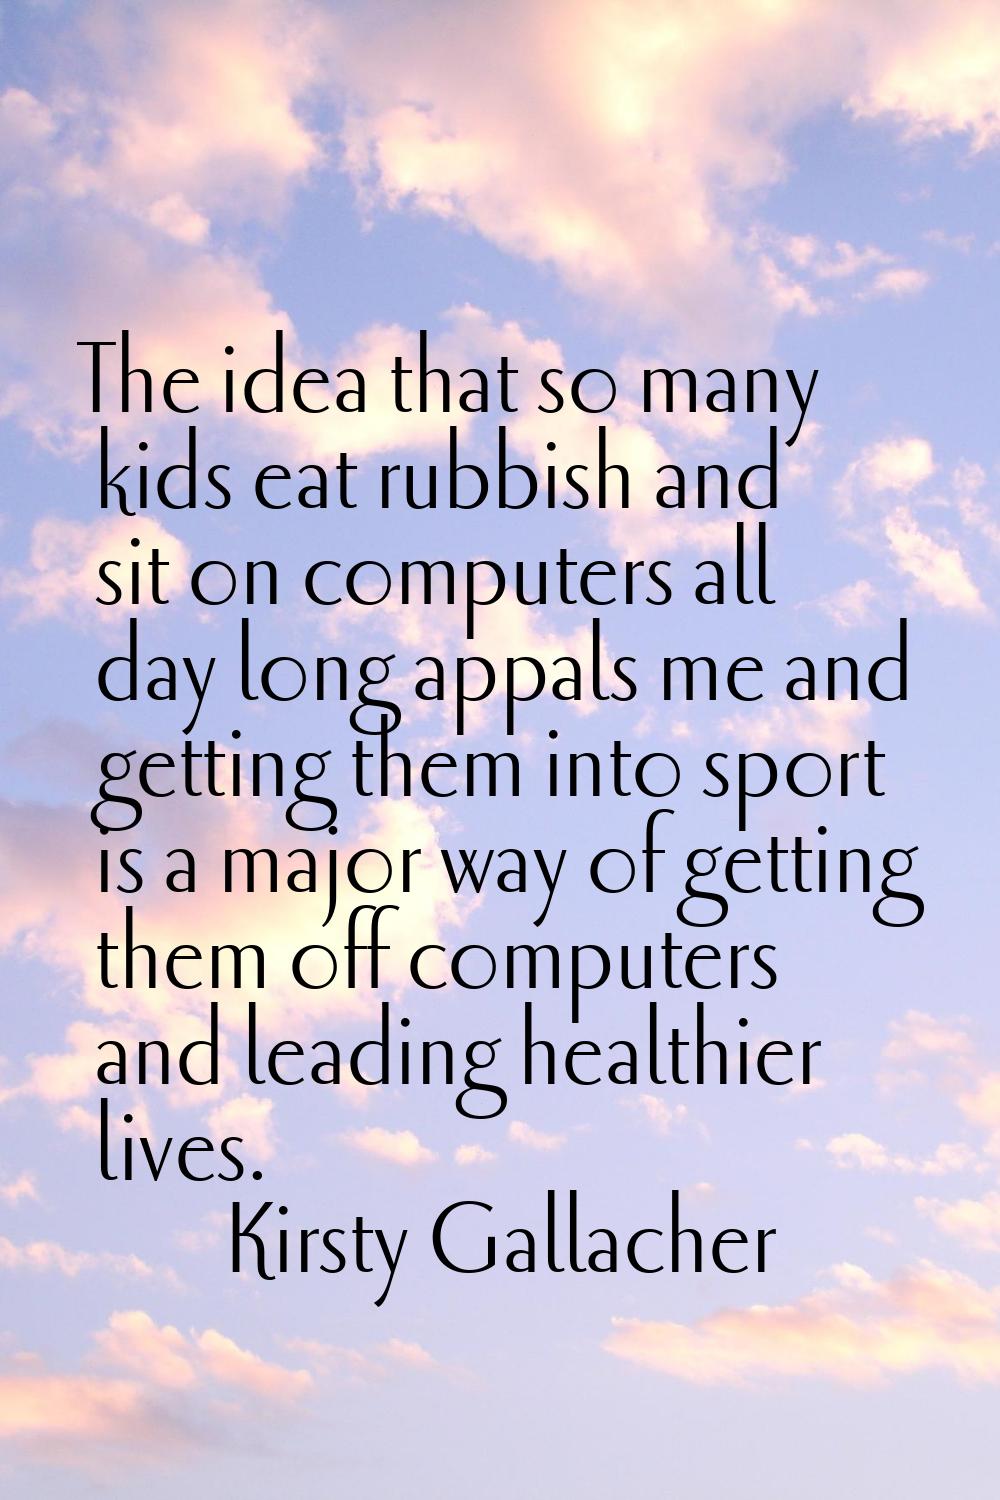 The idea that so many kids eat rubbish and sit on computers all day long appals me and getting them